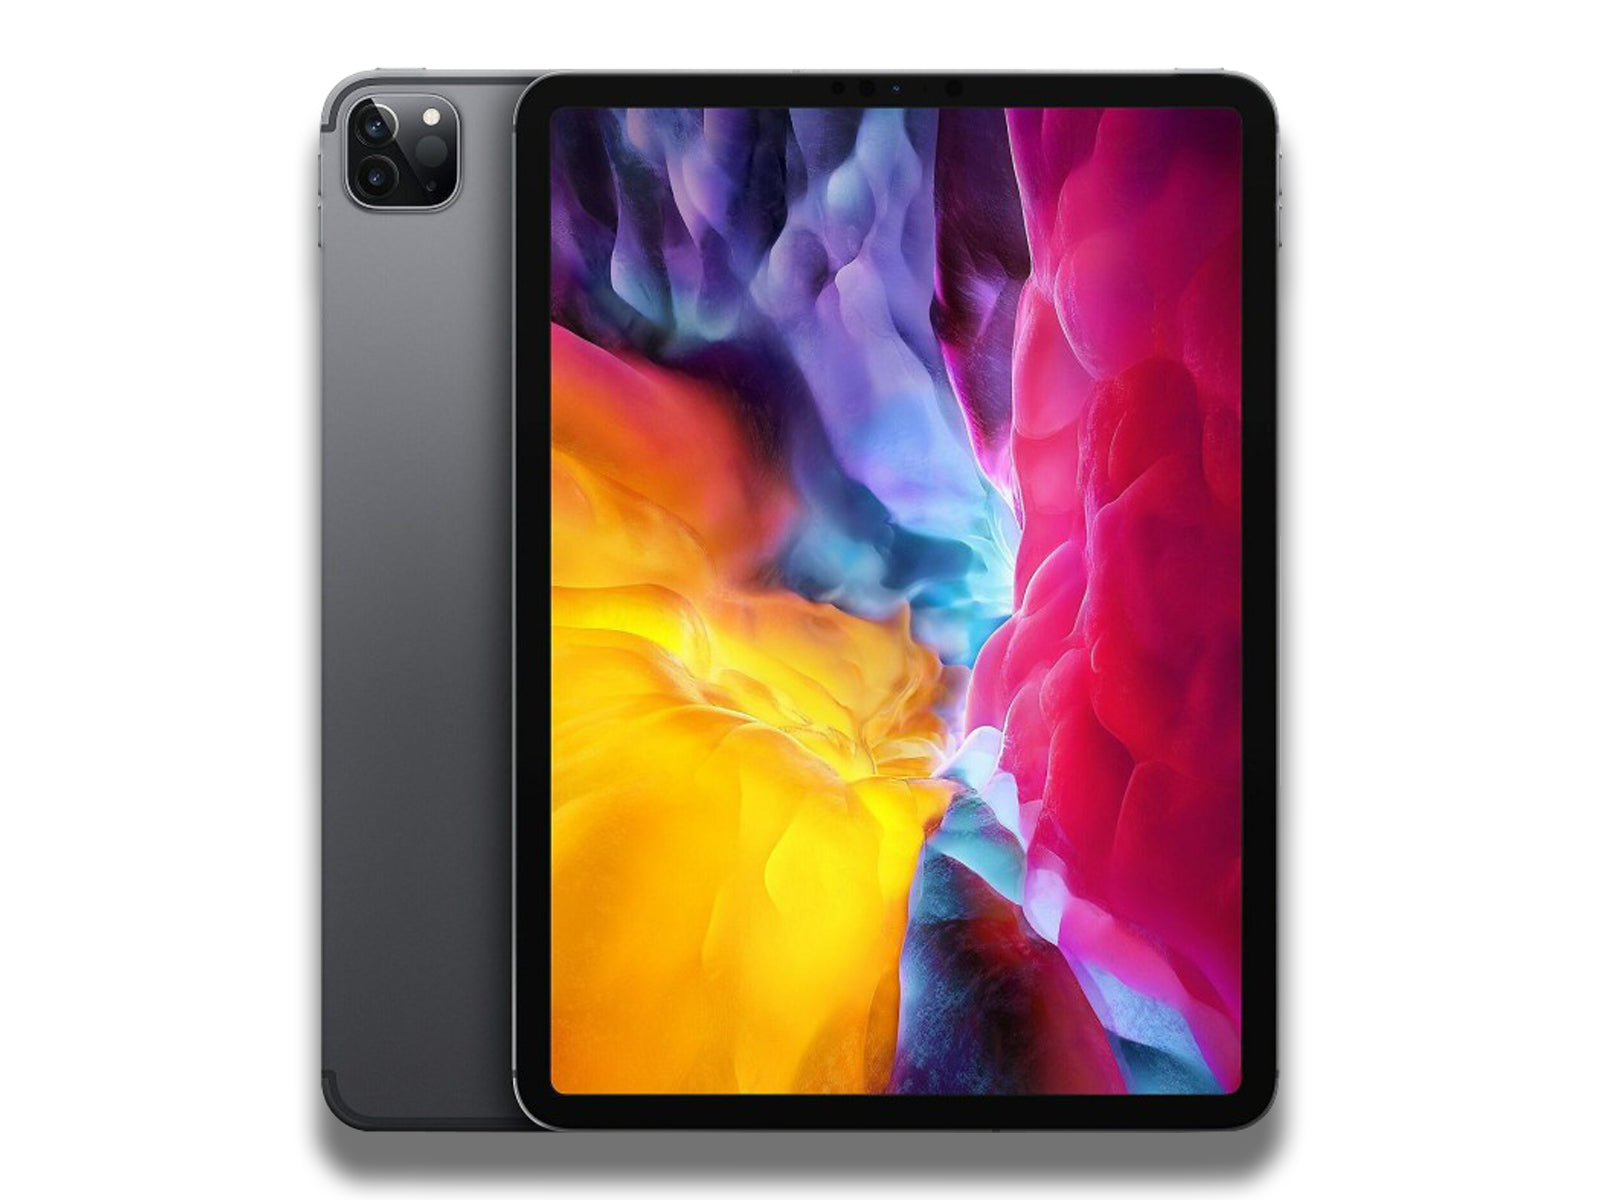 Image shows the space grey Apple iPad Pro 11-inch 2nd Generation